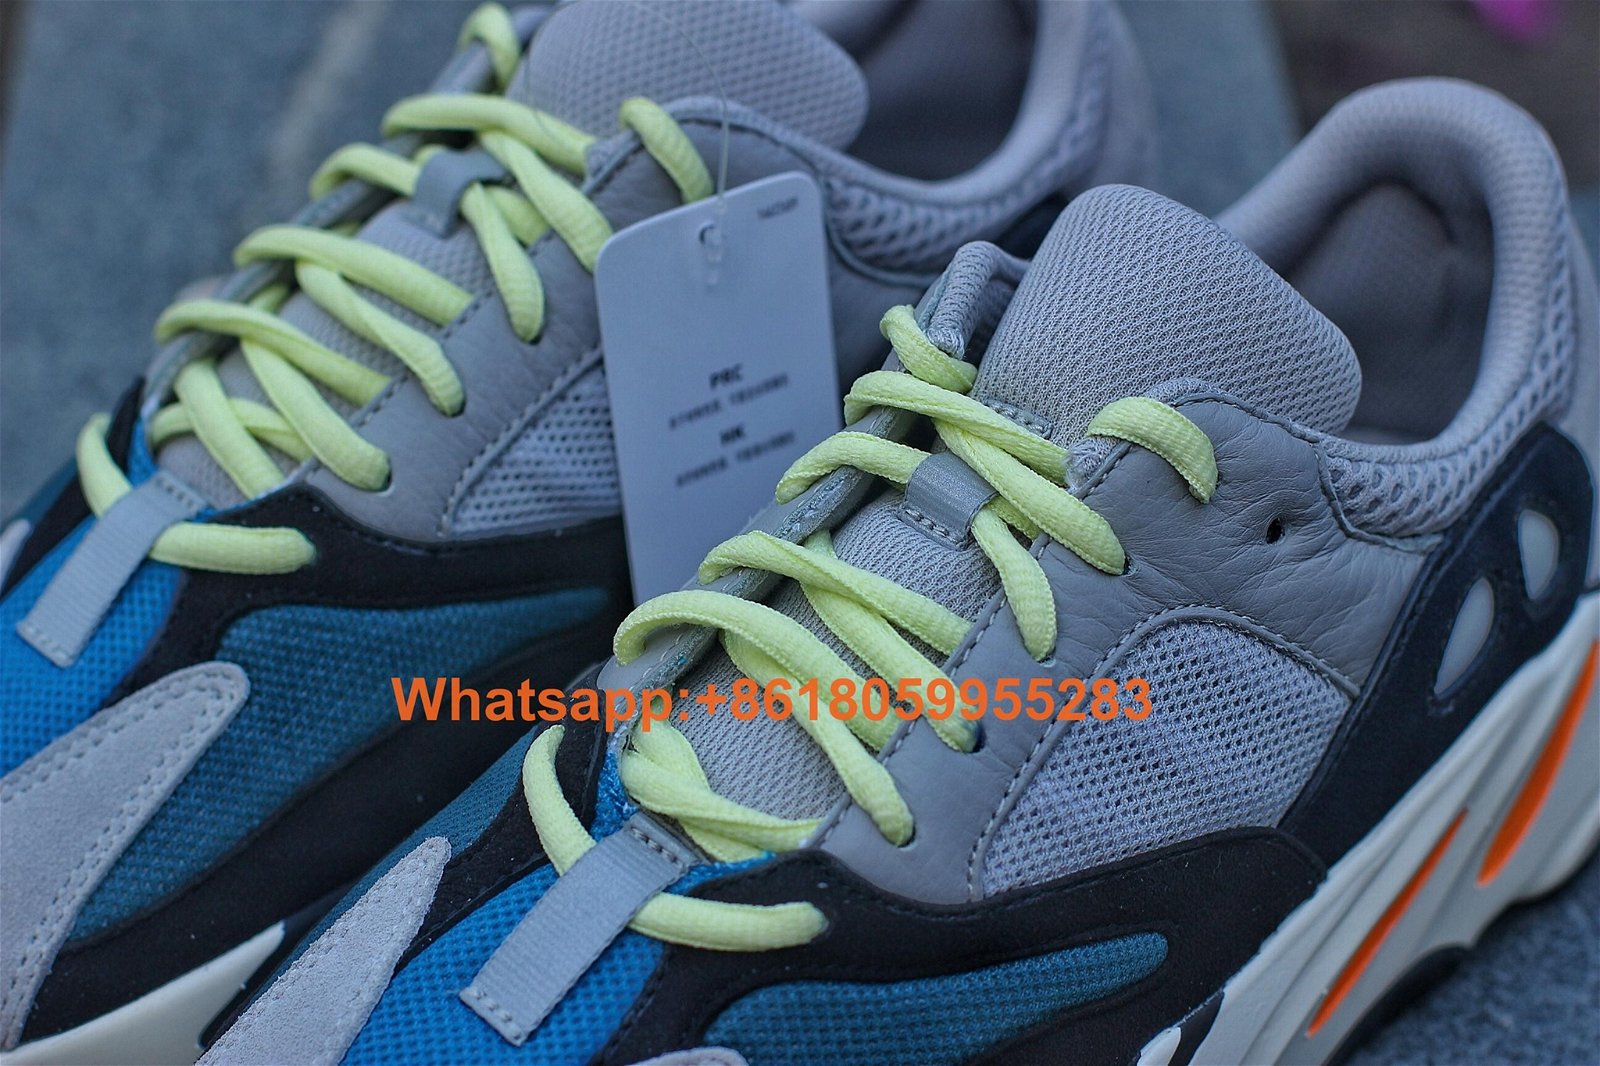 Wholesale        Yeezy 700 Boost Calabasas shoes        Boost running sneakers 3